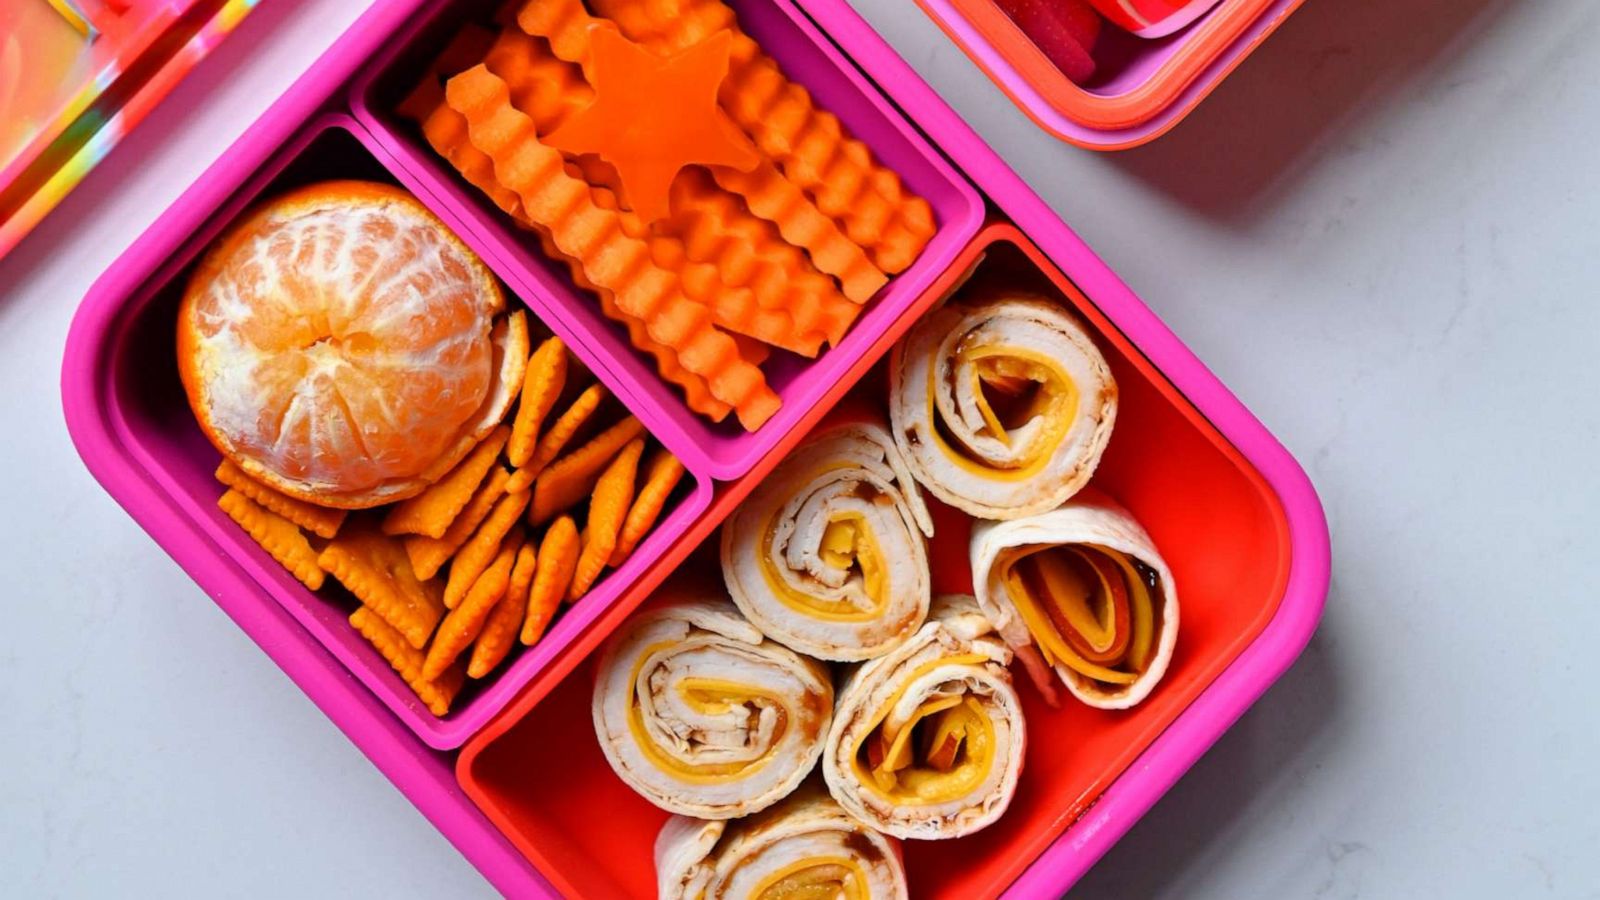 The Best School Lunch Idea: the Bento Box - The New York Times